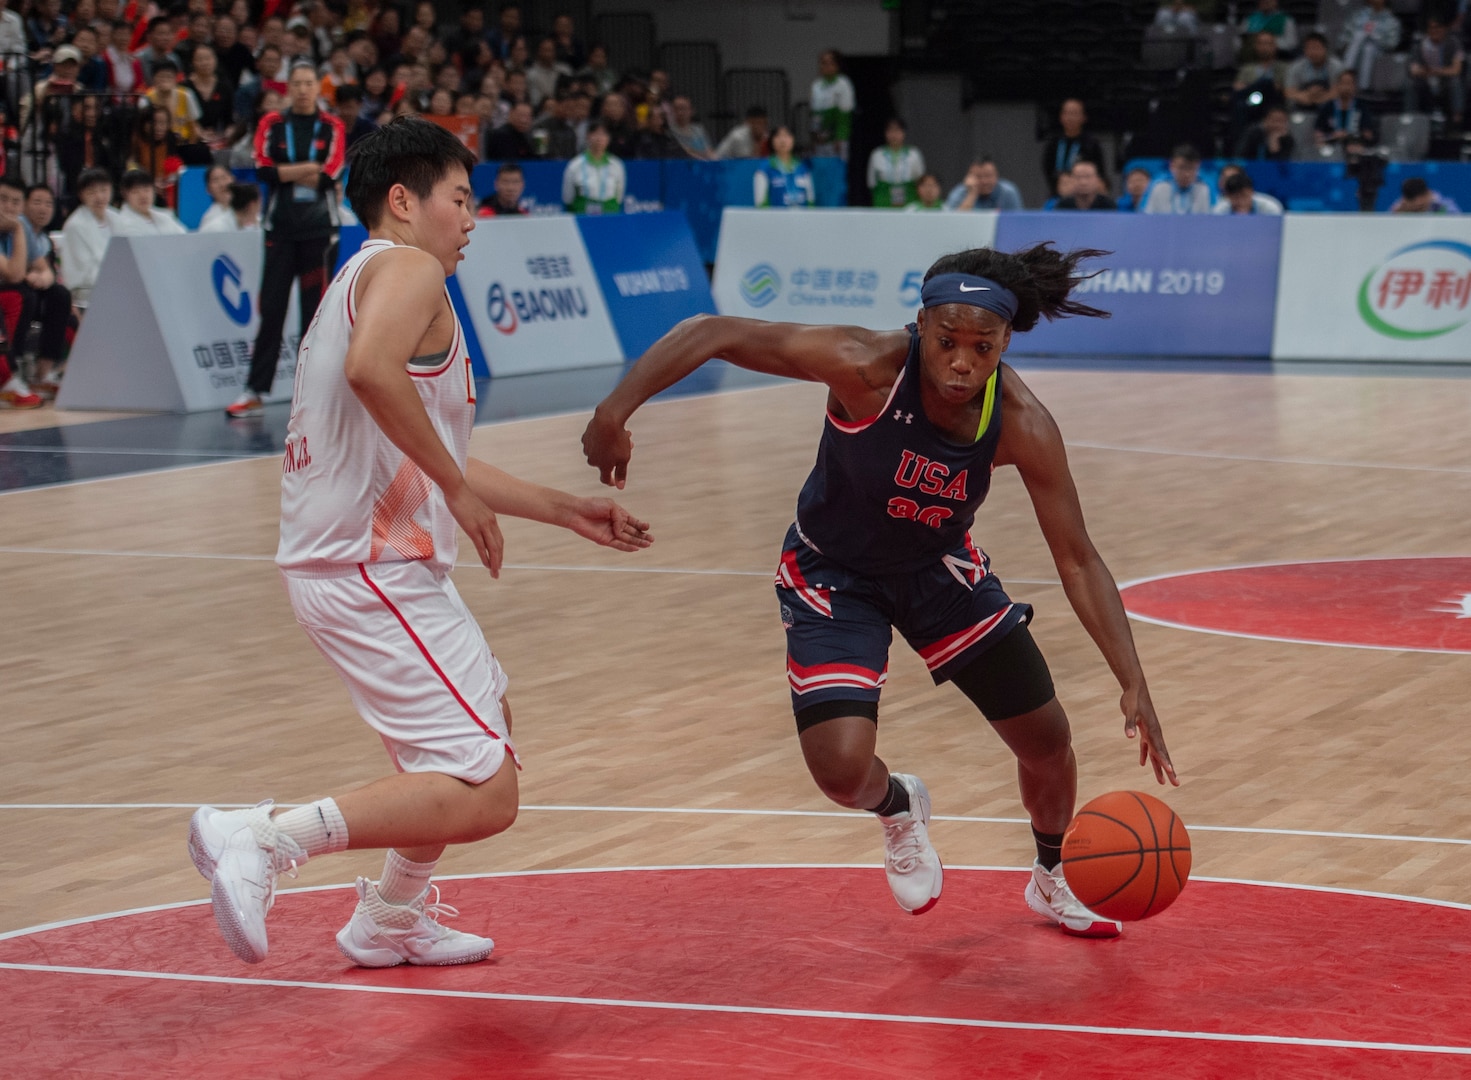 U.S. Army Sgt. Donita Adams, United States Armed Forces Military World Games Women’s Basketball player, drives past a Chinese defender during the Conseil International du Sport Militaire Women’s Basketball Competion in Wuhan China, Oct. 22, 2019. The 7th MWG will feature military athletes from around the world with an estimated participation of more than 100 nations and more than 10,000 participants. (U.S. Air Force photo by Staff Sergeant James R. Crow)